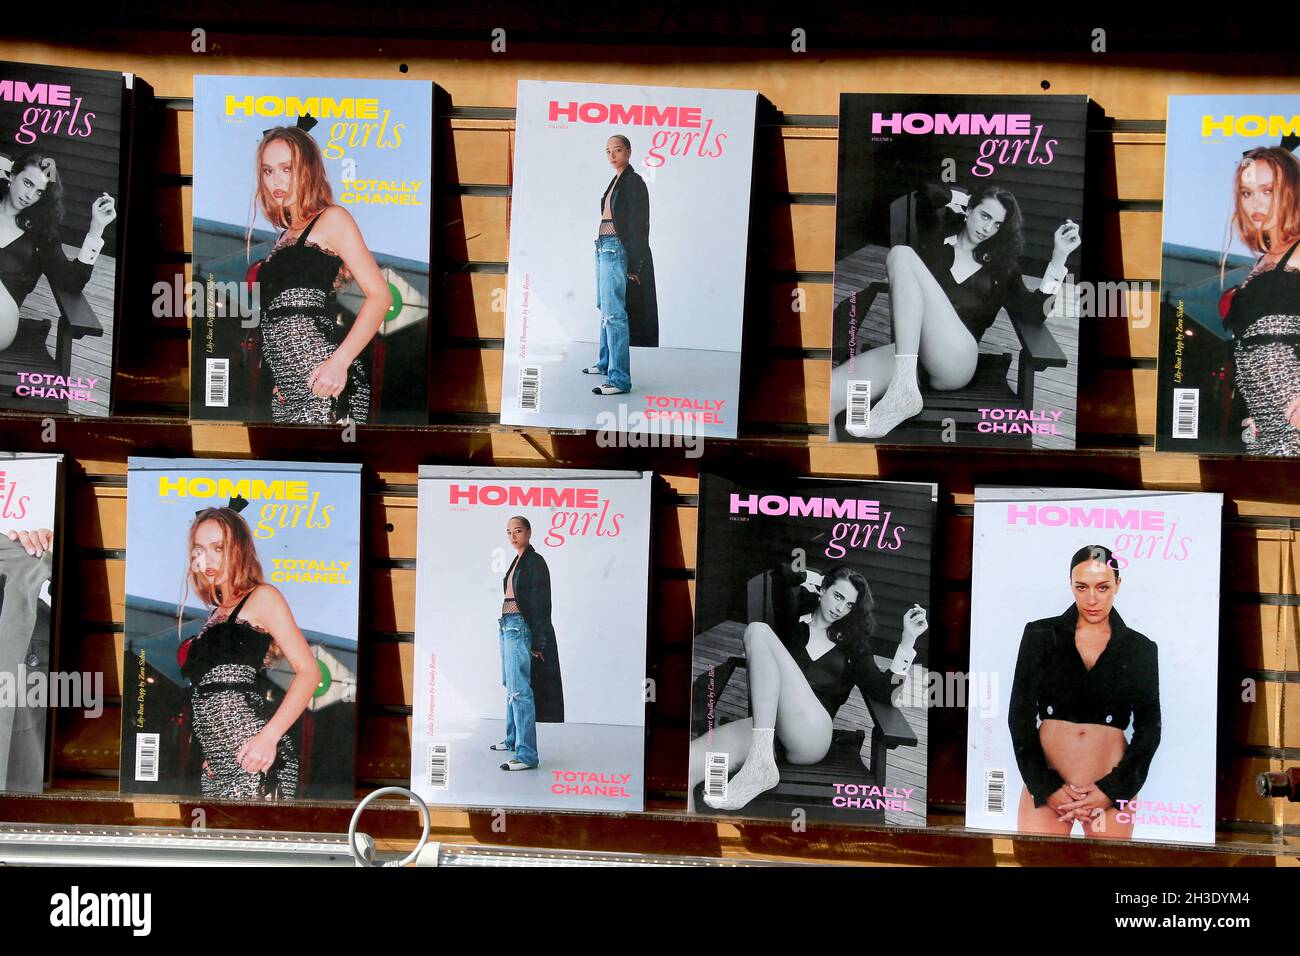 Fashion magazine Homme Girls covers Volume 6 Totally Chanel with actresses Lily Rose Depp, Chloe Sevigny, Whitney Peak, Zsela Thompson, Margaret Qualley and Greta Lee at the window of Iconic Cafe store in Soho, New York on October 27, 2021. Photo by Charles Guerin/ABACAPRESS.COM Stock Photo